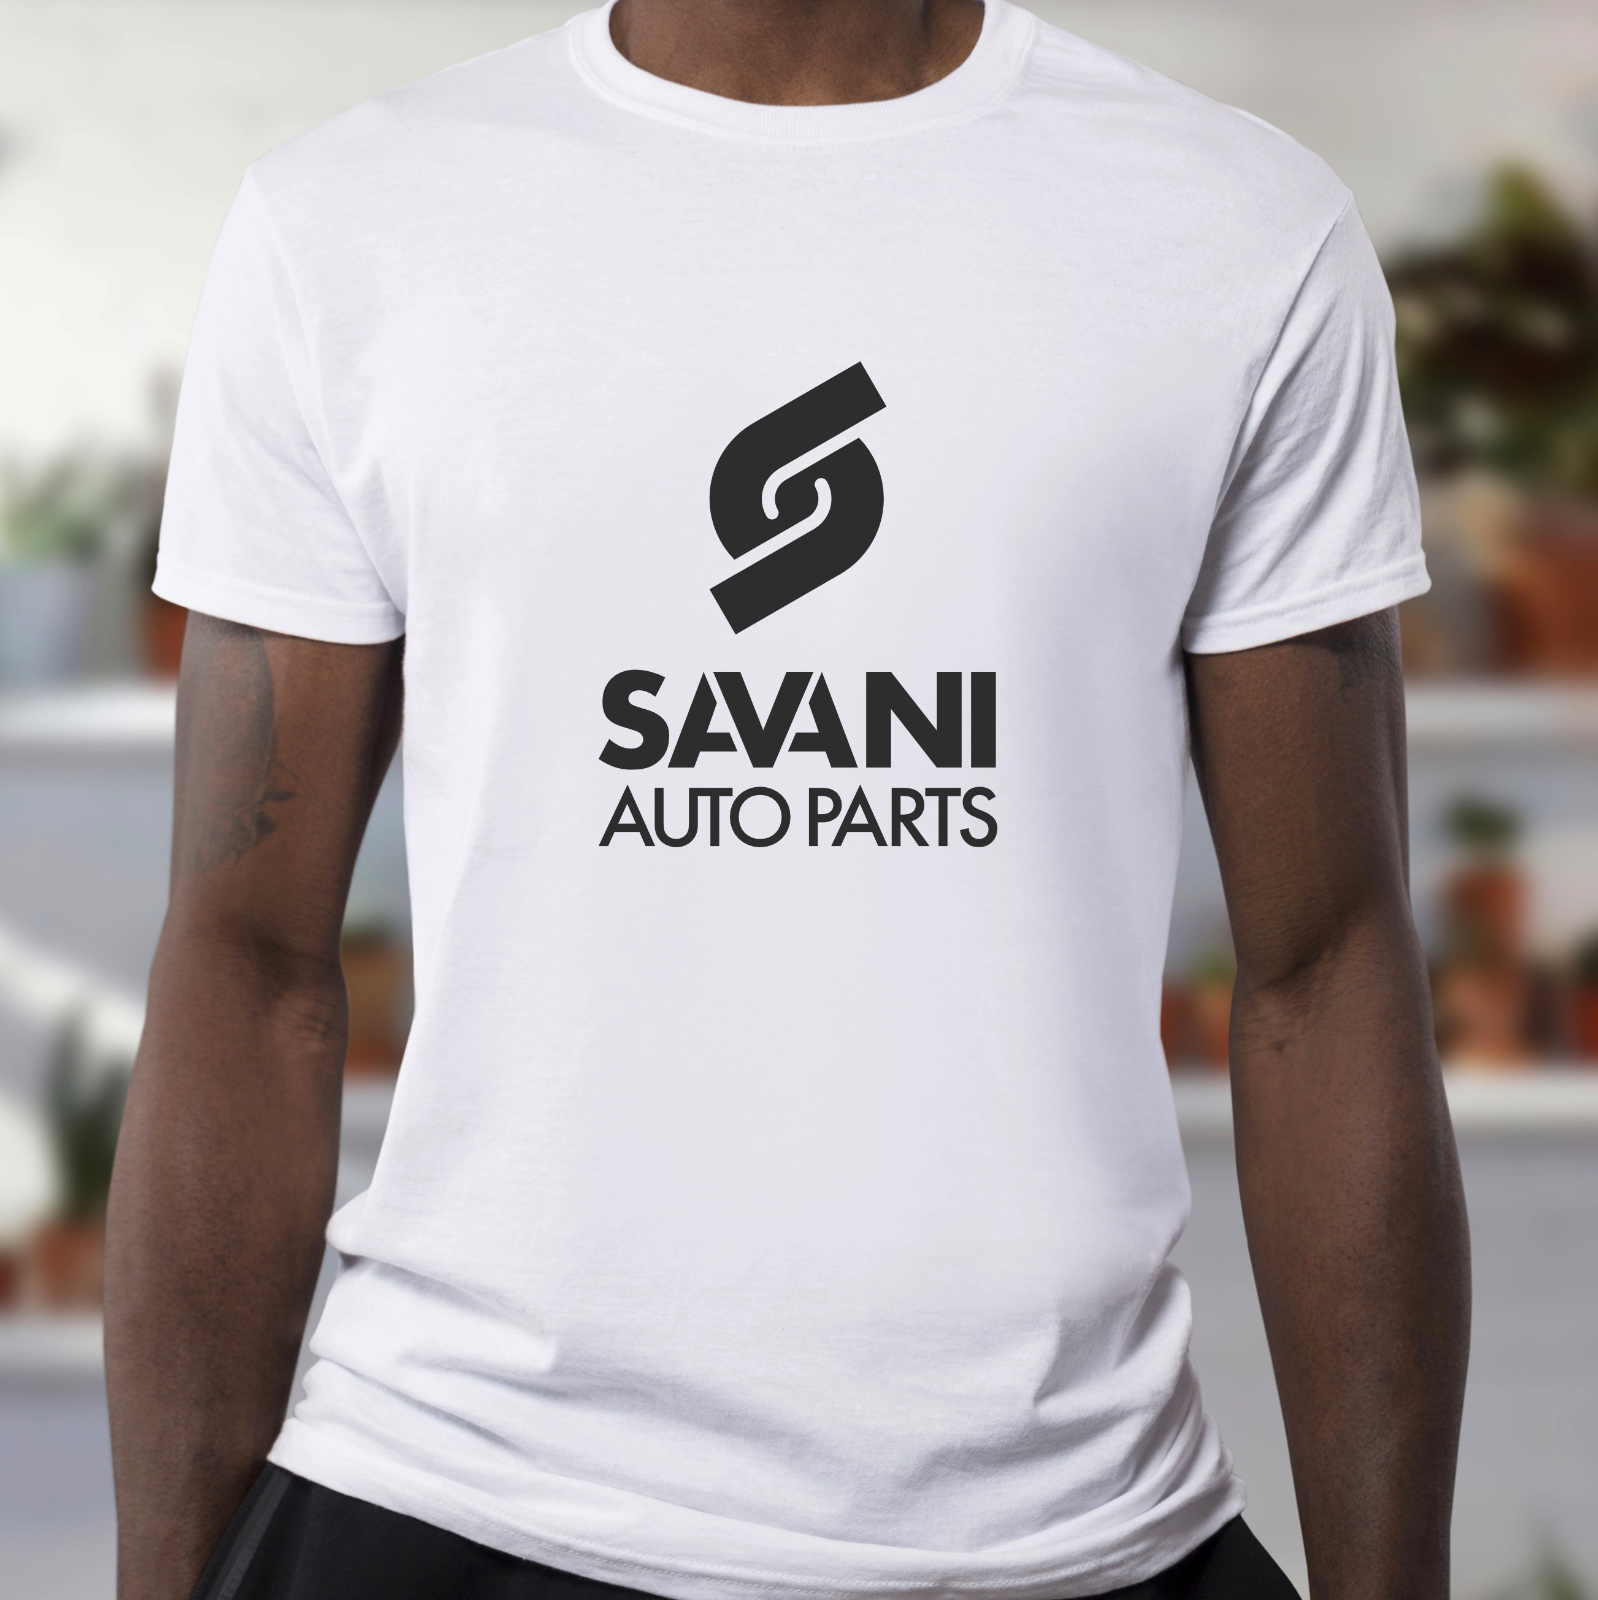 A t-shirt with the Savani Auto Parts logo mark and type logo